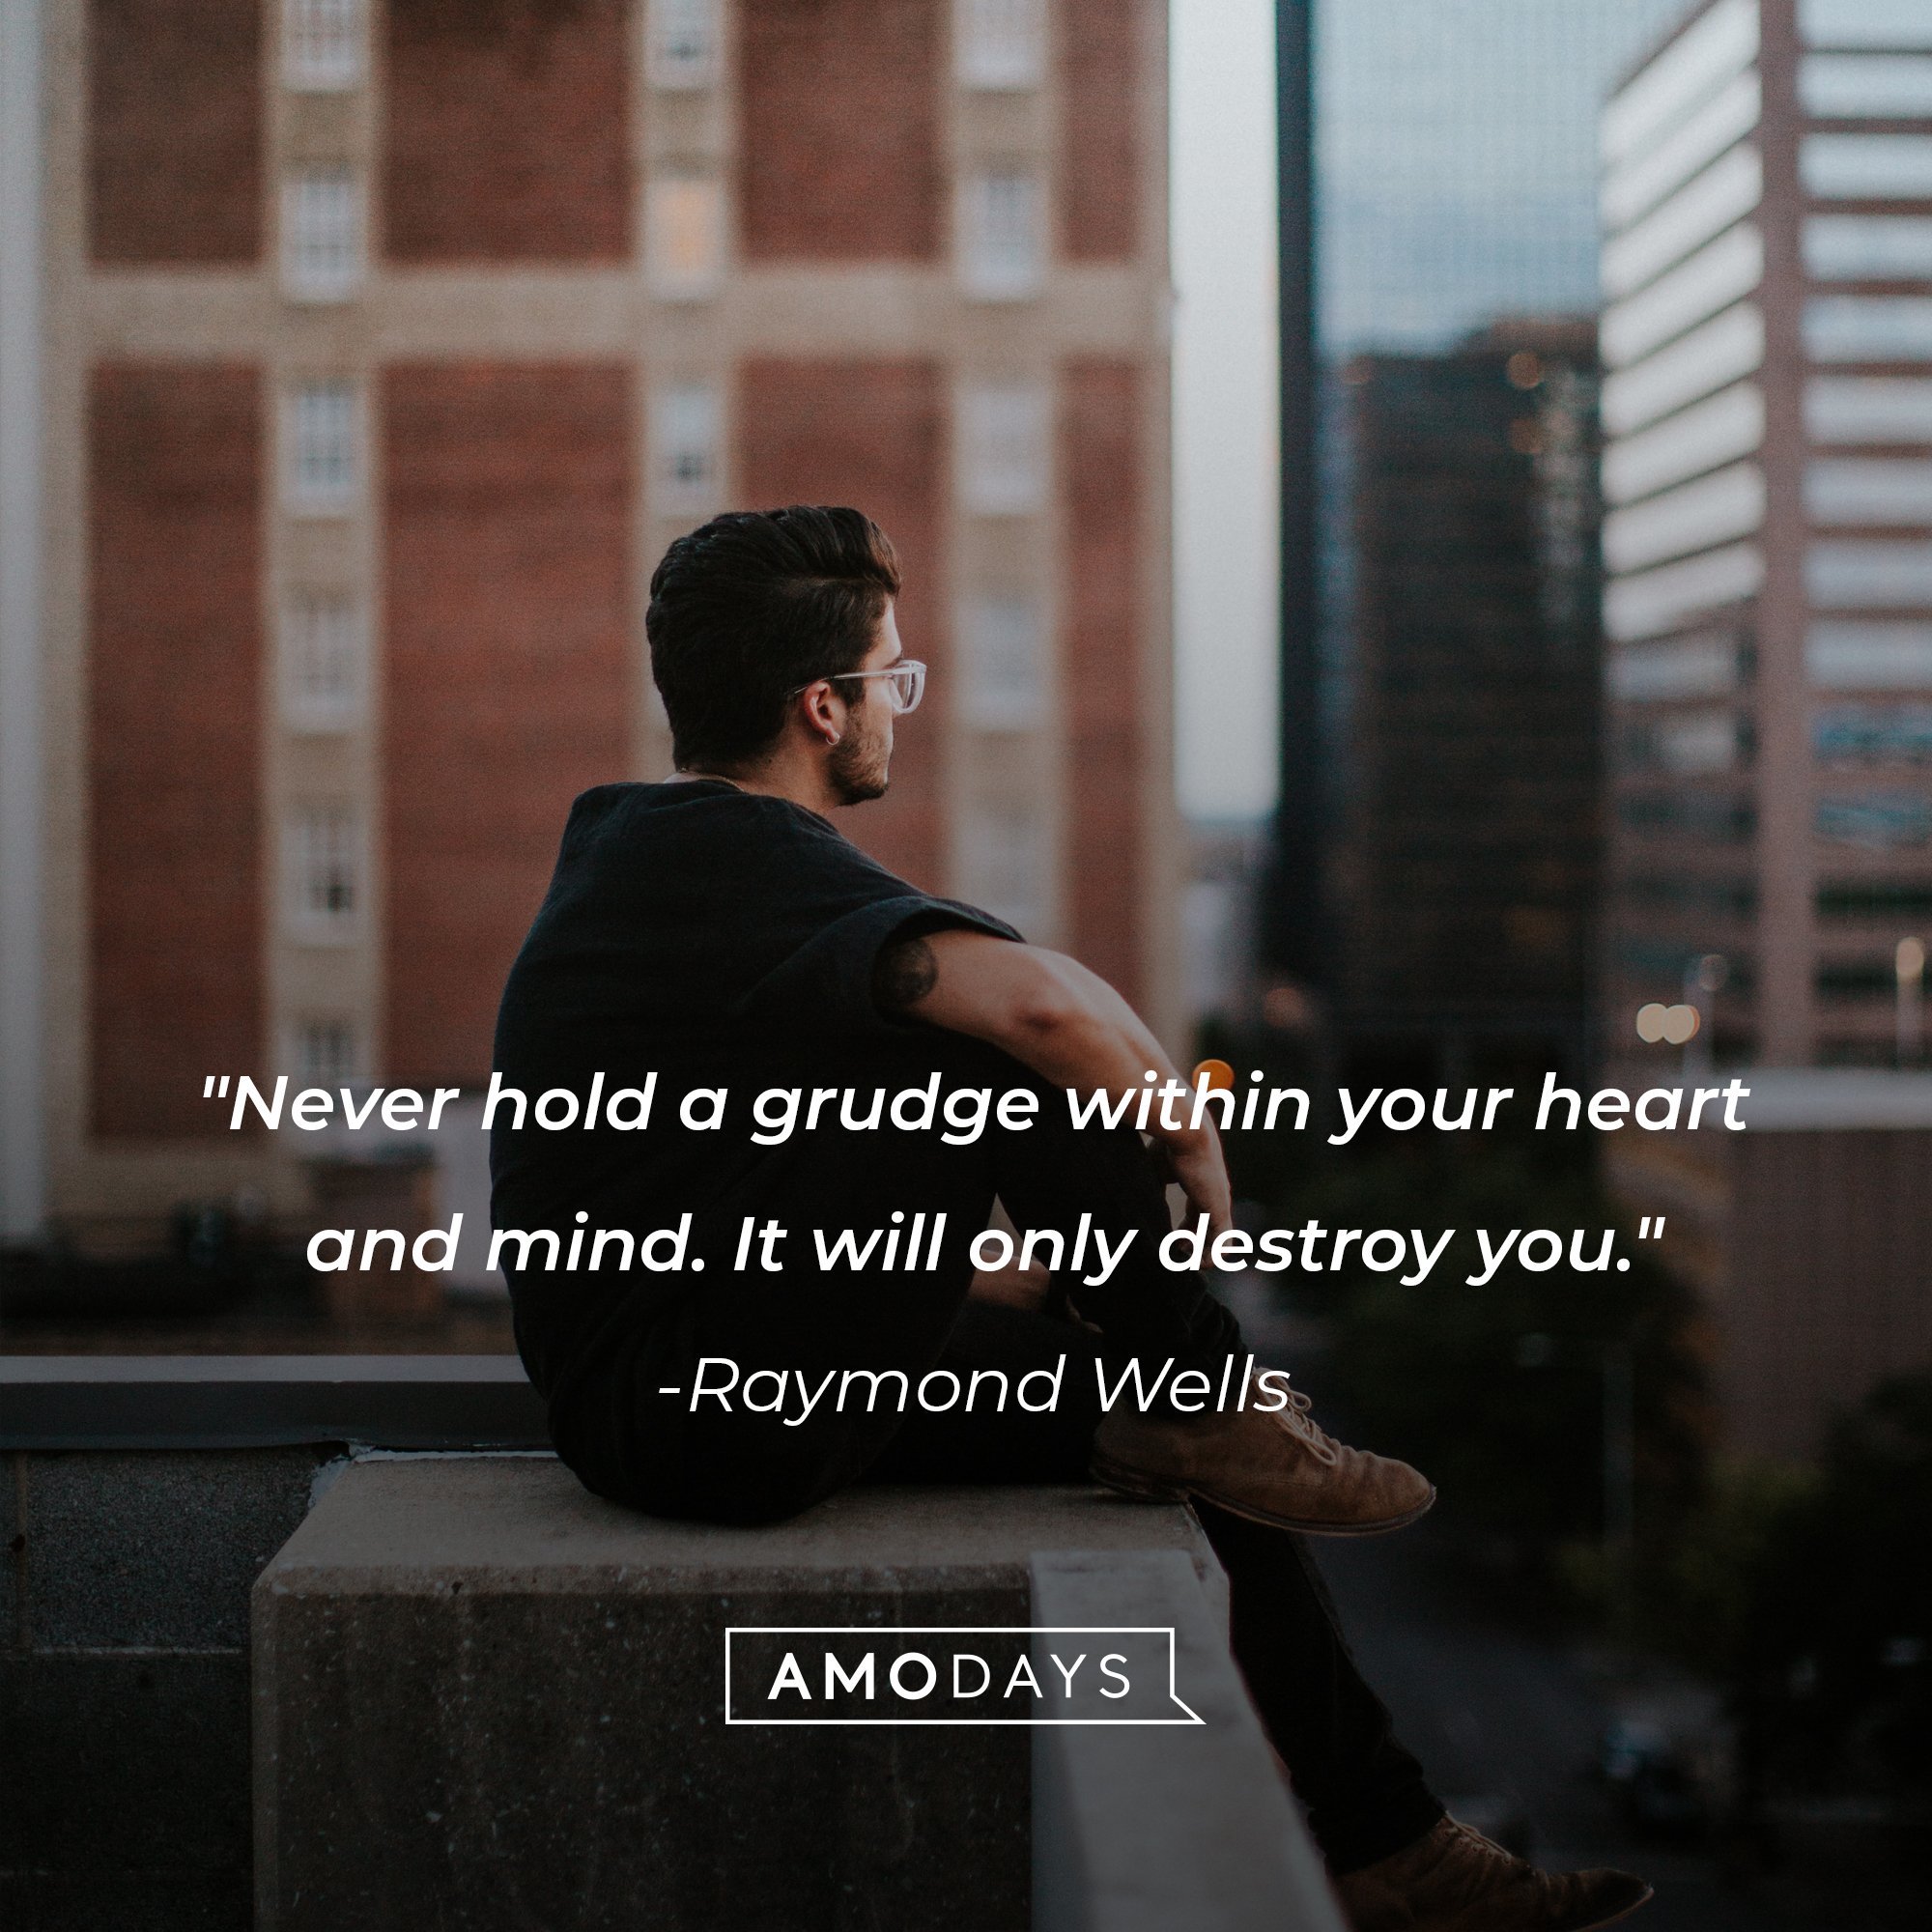 Raymond Wells’ quote: "Never hold a grudge within your heart and mind. It will only destroy you." | Image: AmoDays     